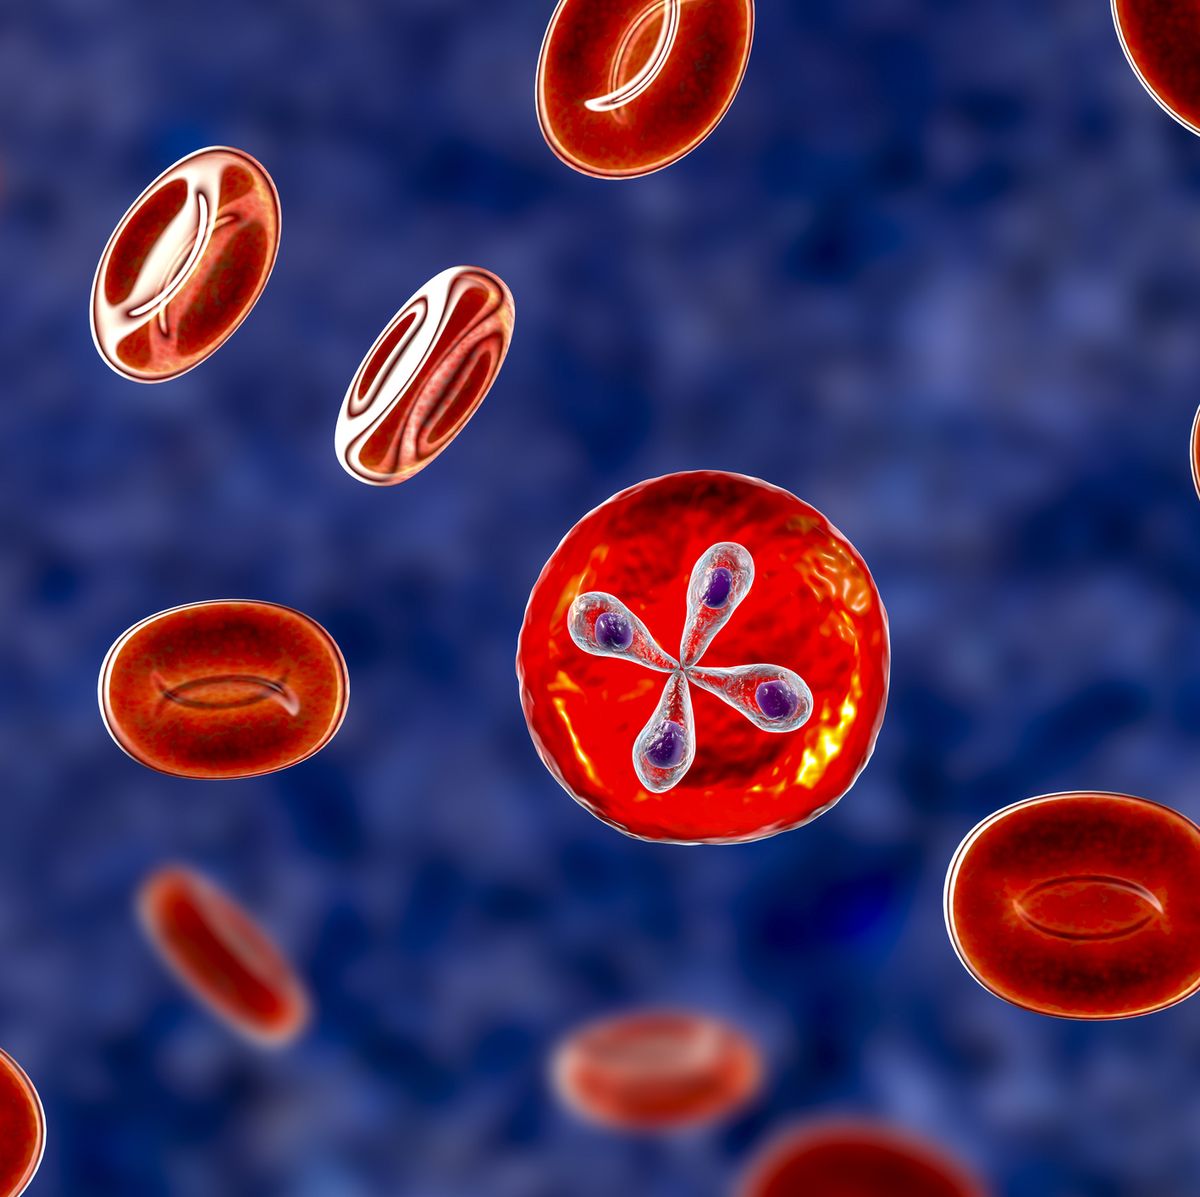 babesia parasites inside red blood cell, the causative agent of babesiosis